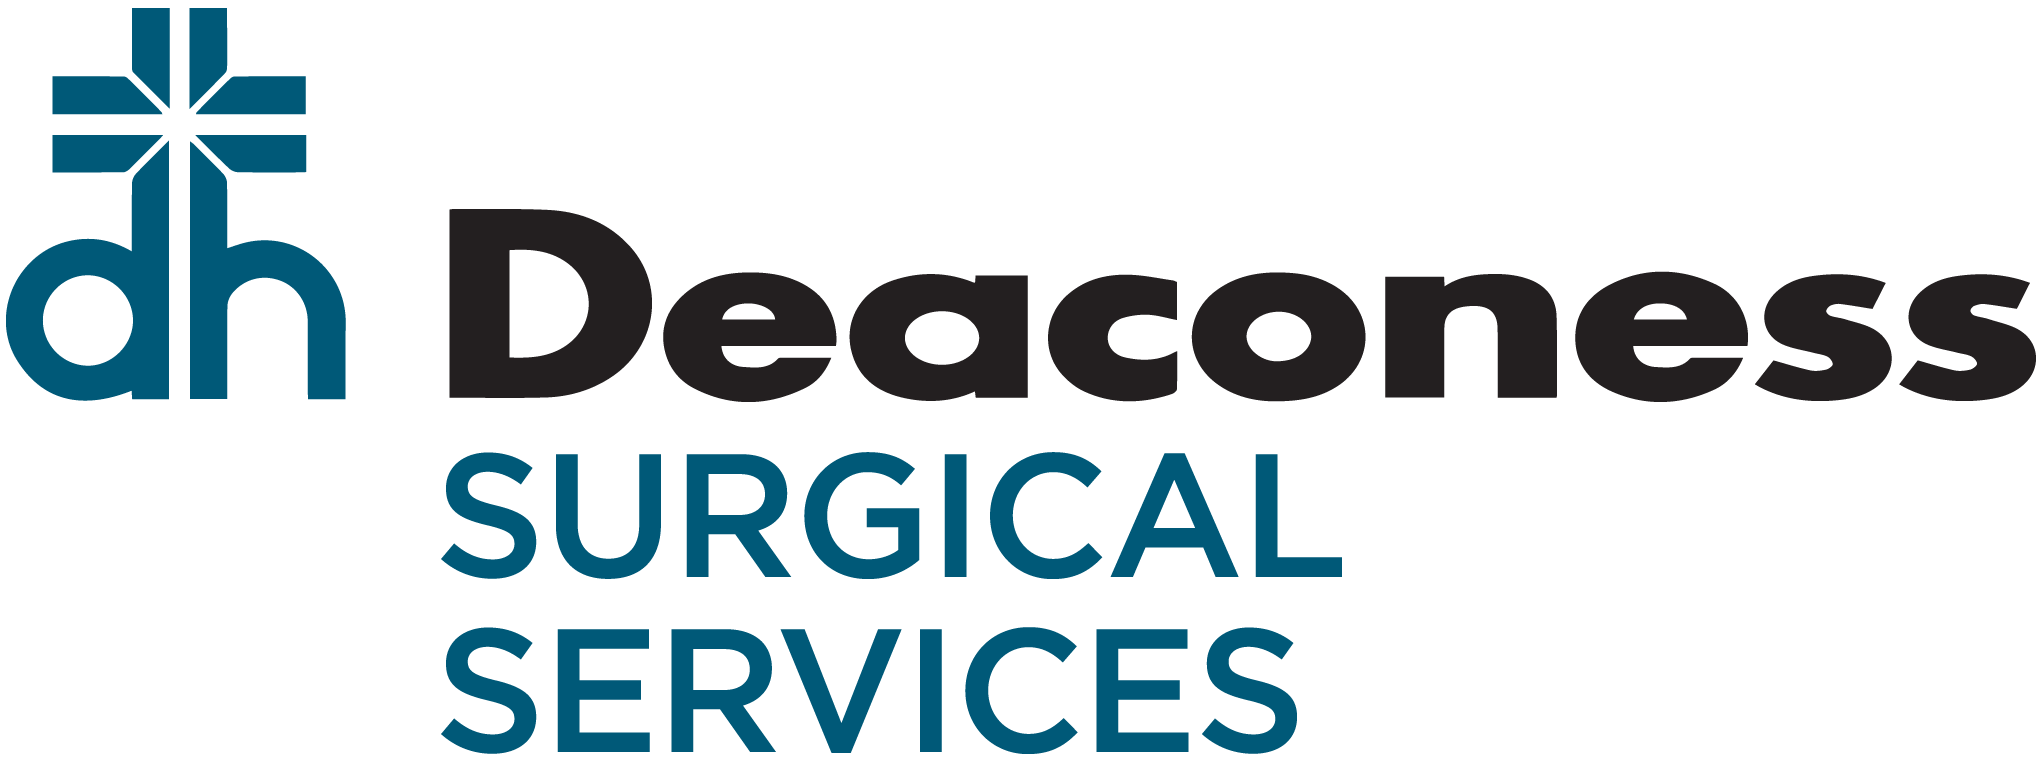 Deaconess Surgical Services